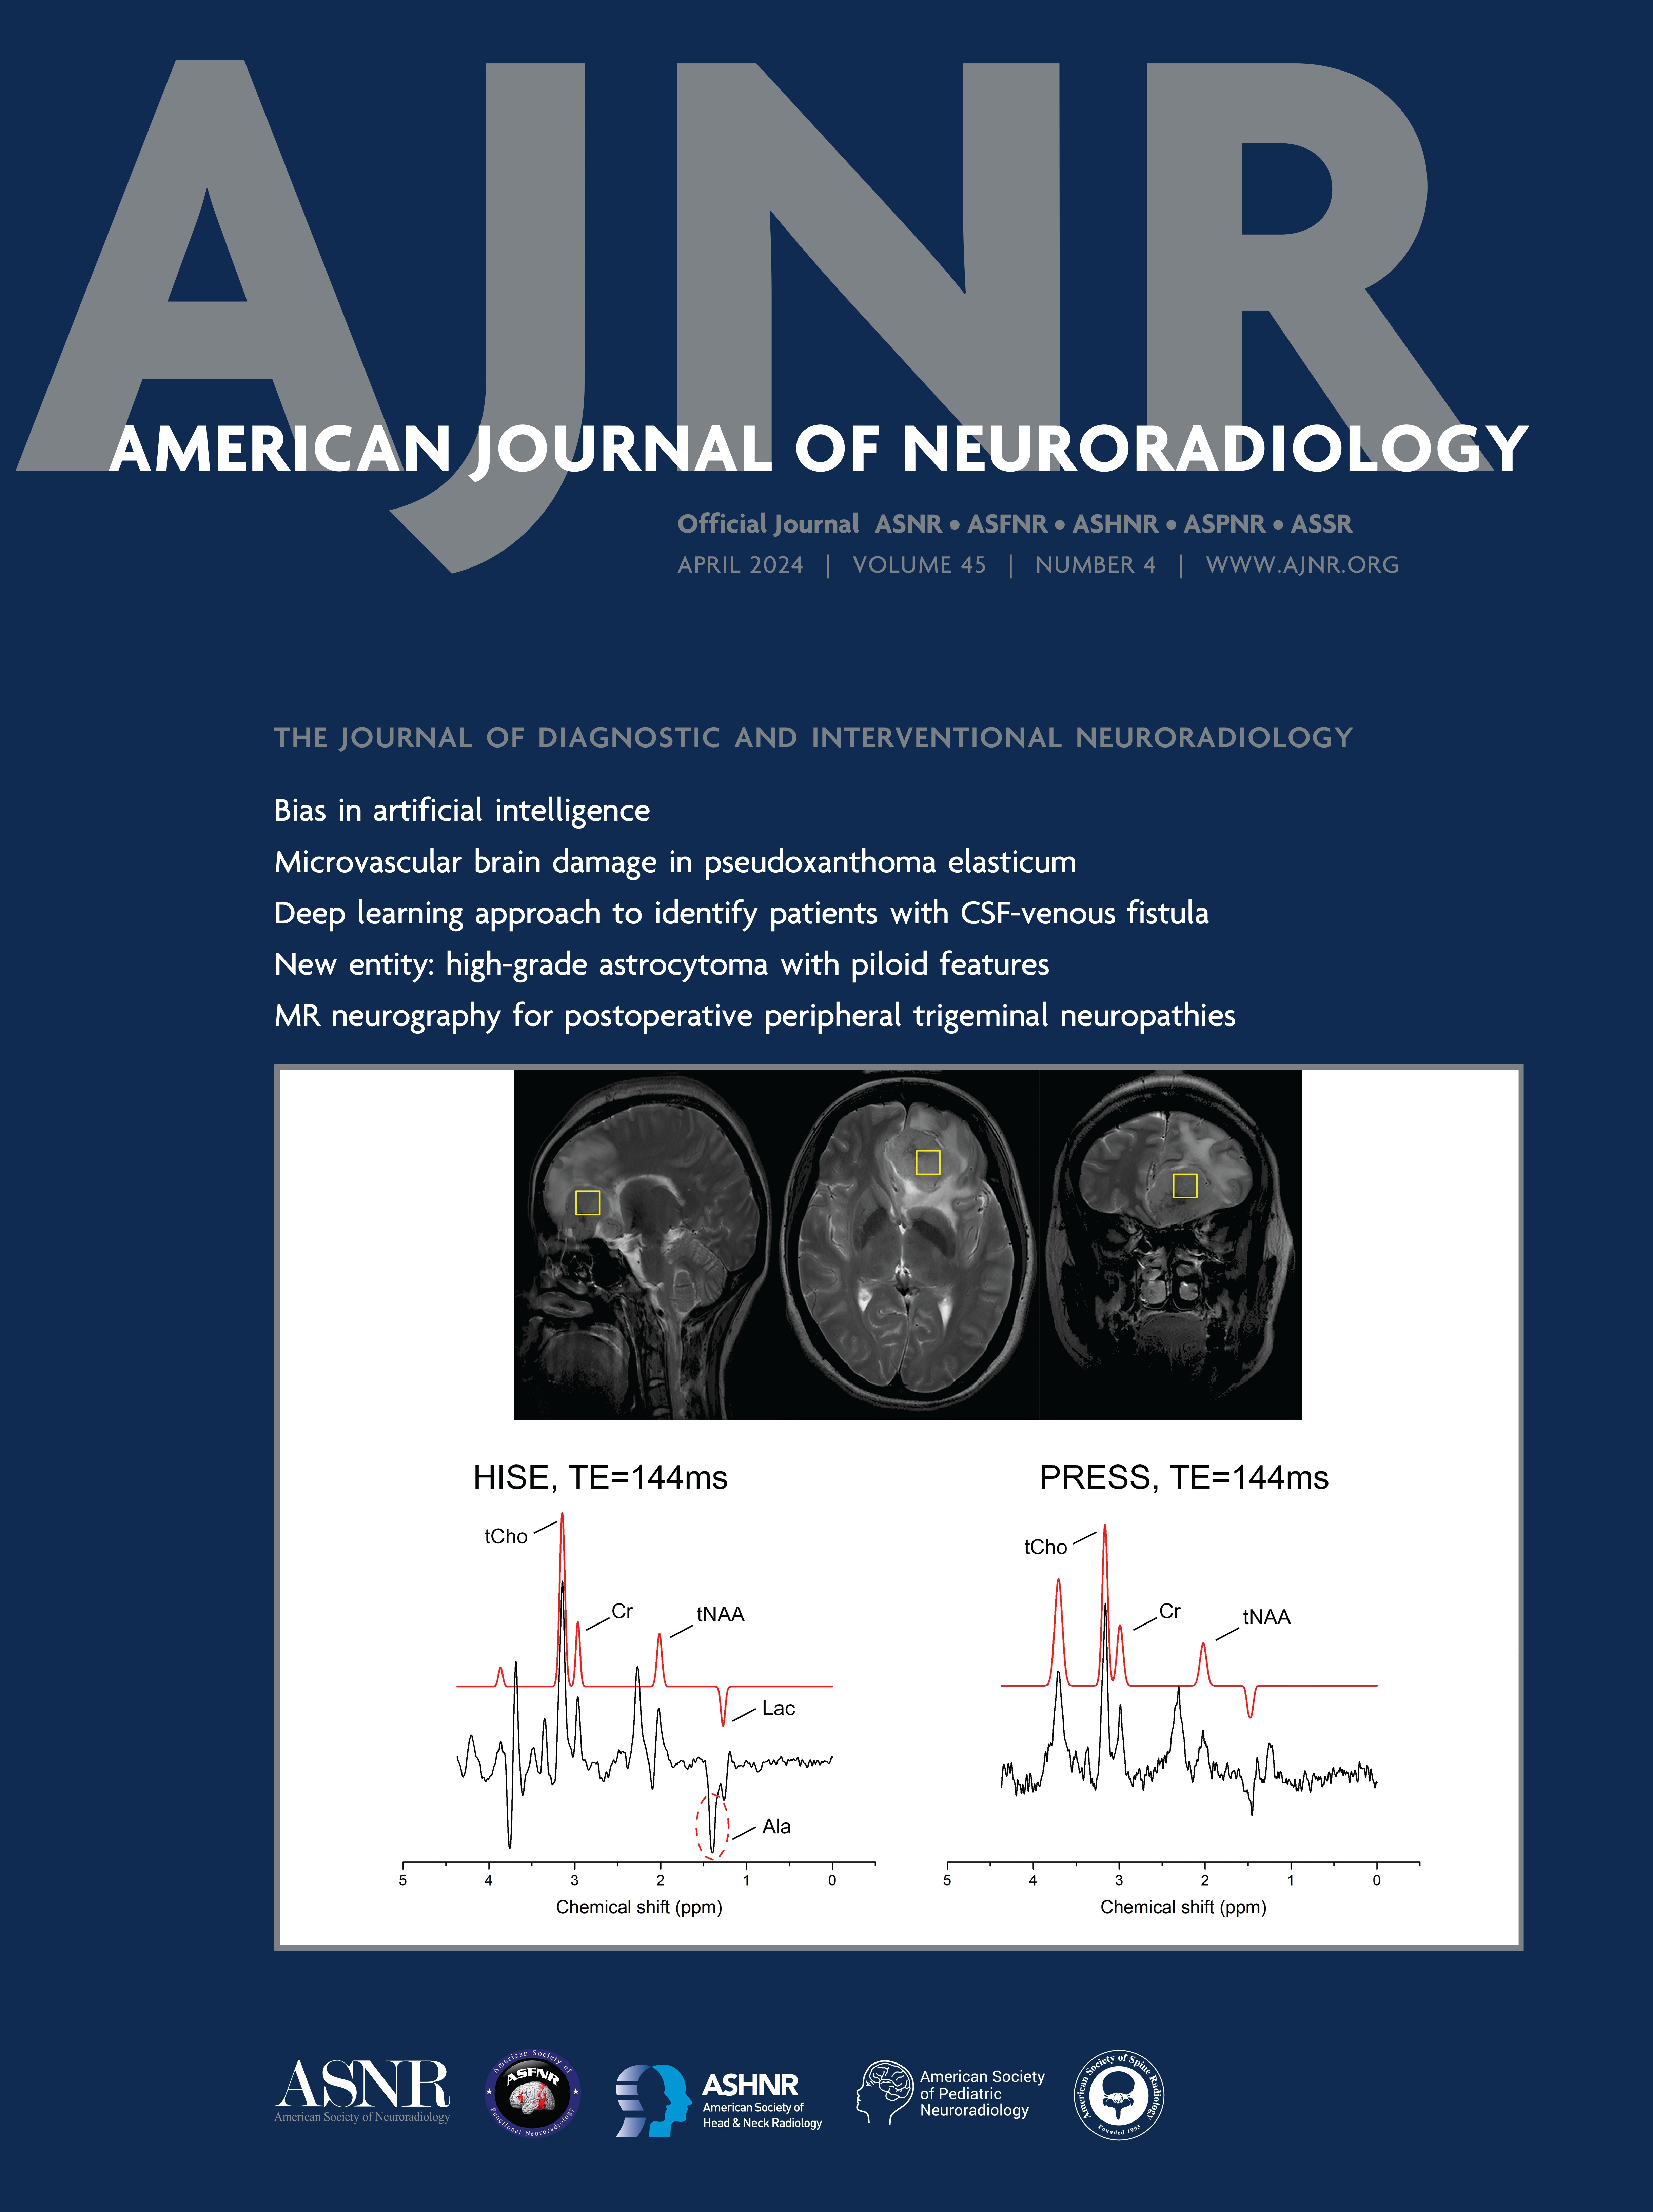 A Clinical and Imaging Fused Deep Learning Model Matches Expert Clinician Prediction of 90-Day Stroke Outcomes [NEUROVASCULAR/STROKE IMAGING]